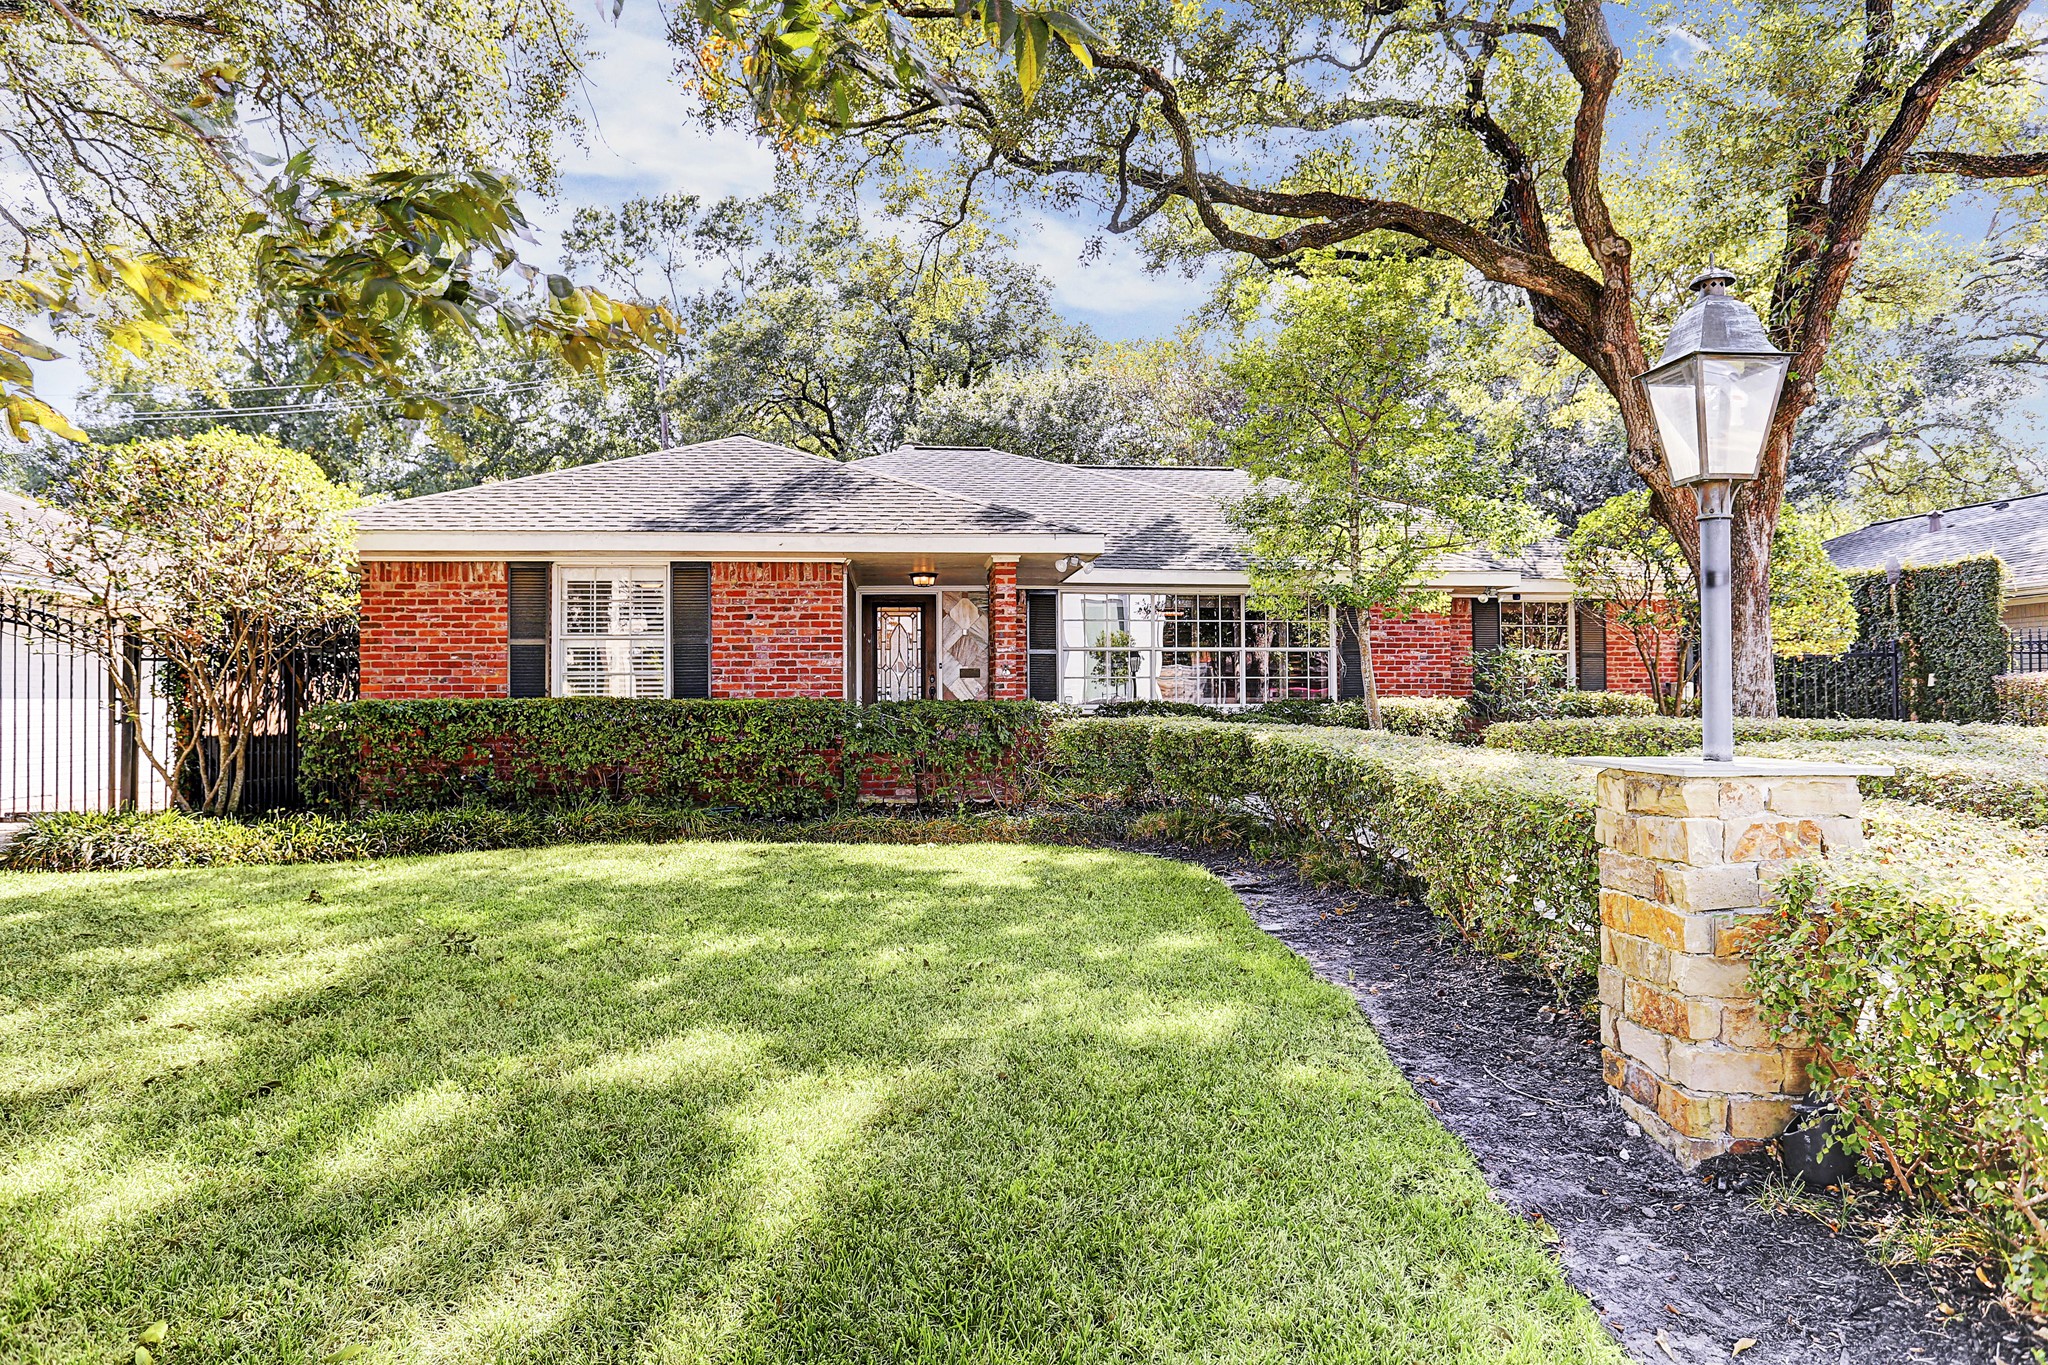 Welcome to 4727 Devon, a classic brick ranch in Afton Oaks